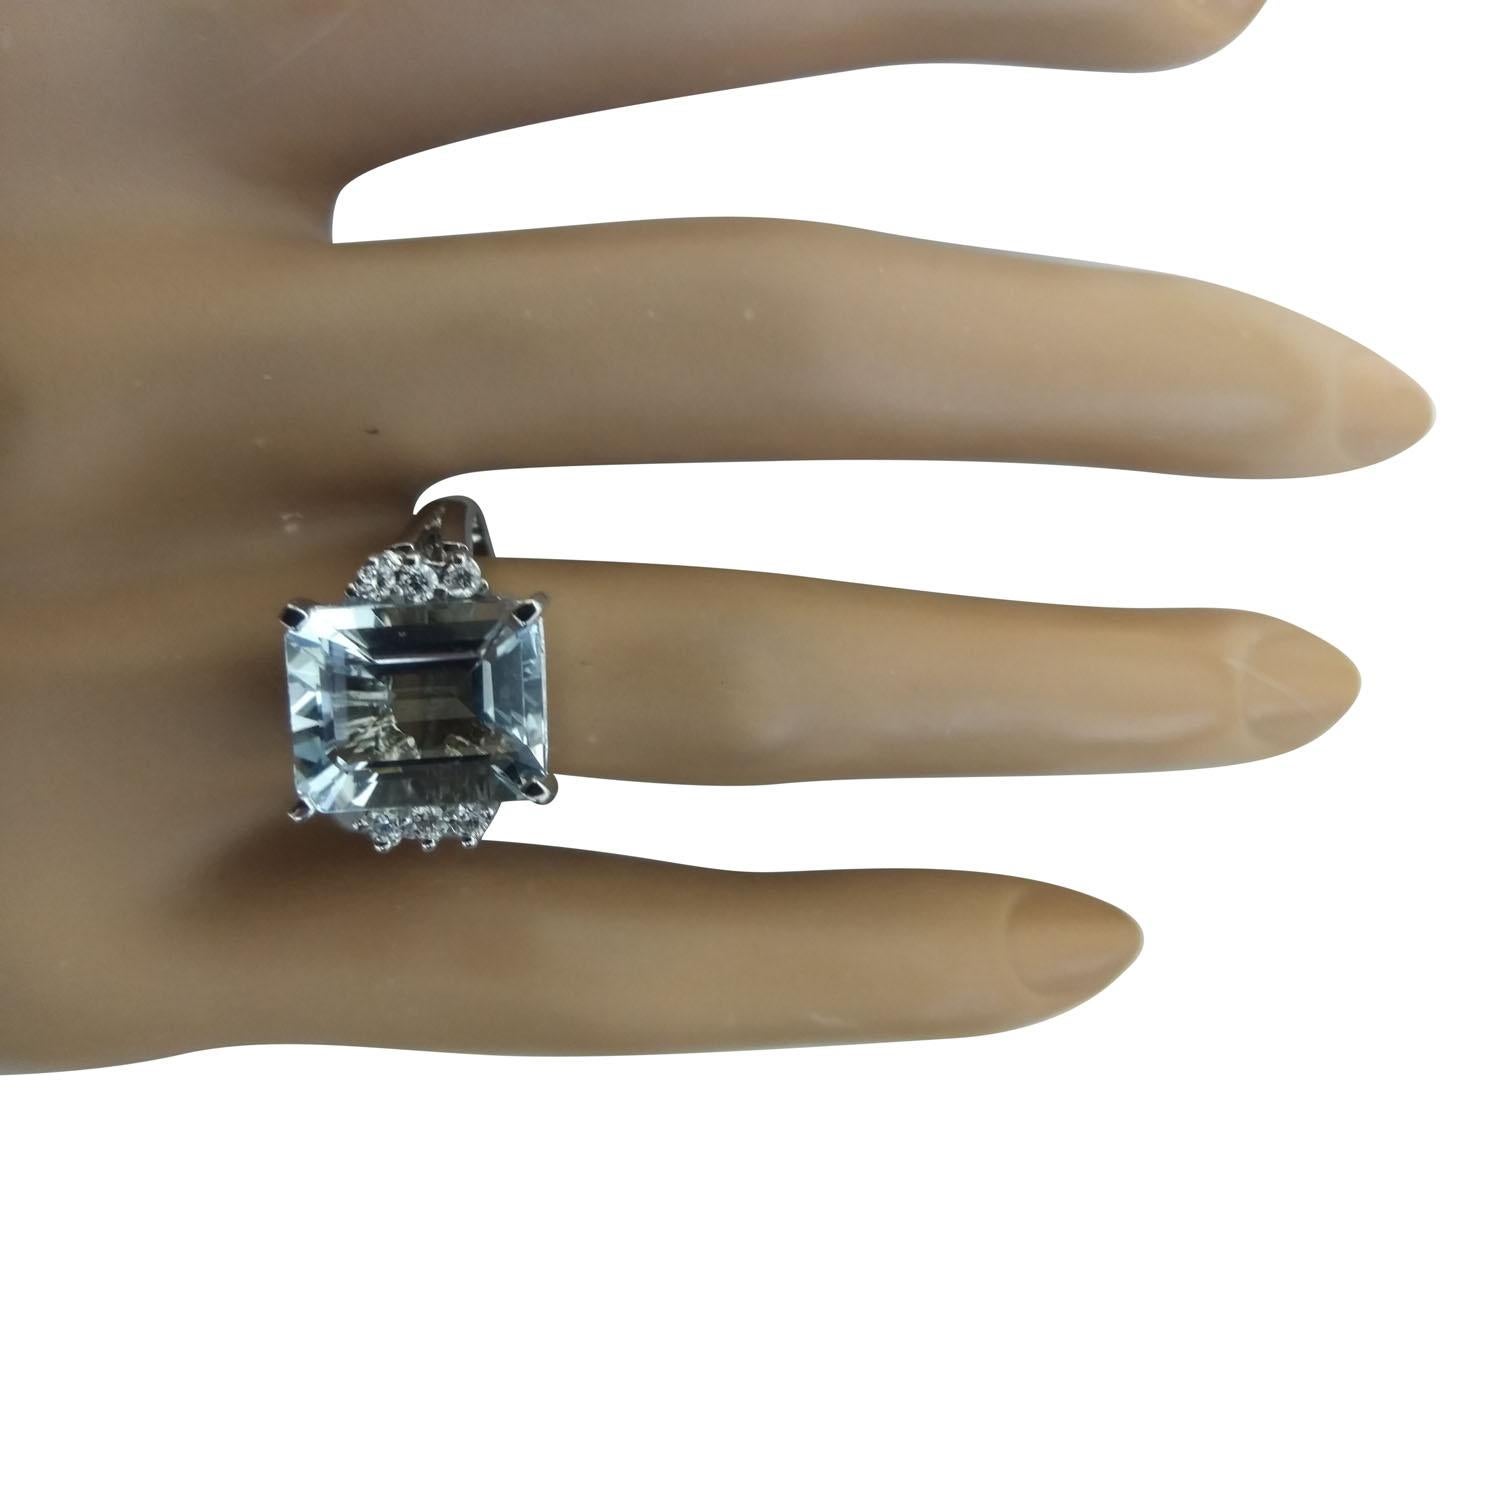 5.85 Carat Natural Aquamarine 14 Karat Solid White Gold Diamond Ring
Stamped: 14K 
Total Ring Weight: 4.8 Grams 
Aquamarine Weight 5.67 Carat (12.00x10.00 Millimeters)
Diamond Weight: 0.18 carat (F-G Color, VS2-SI1 Clarity)
Quantity: 6
Face